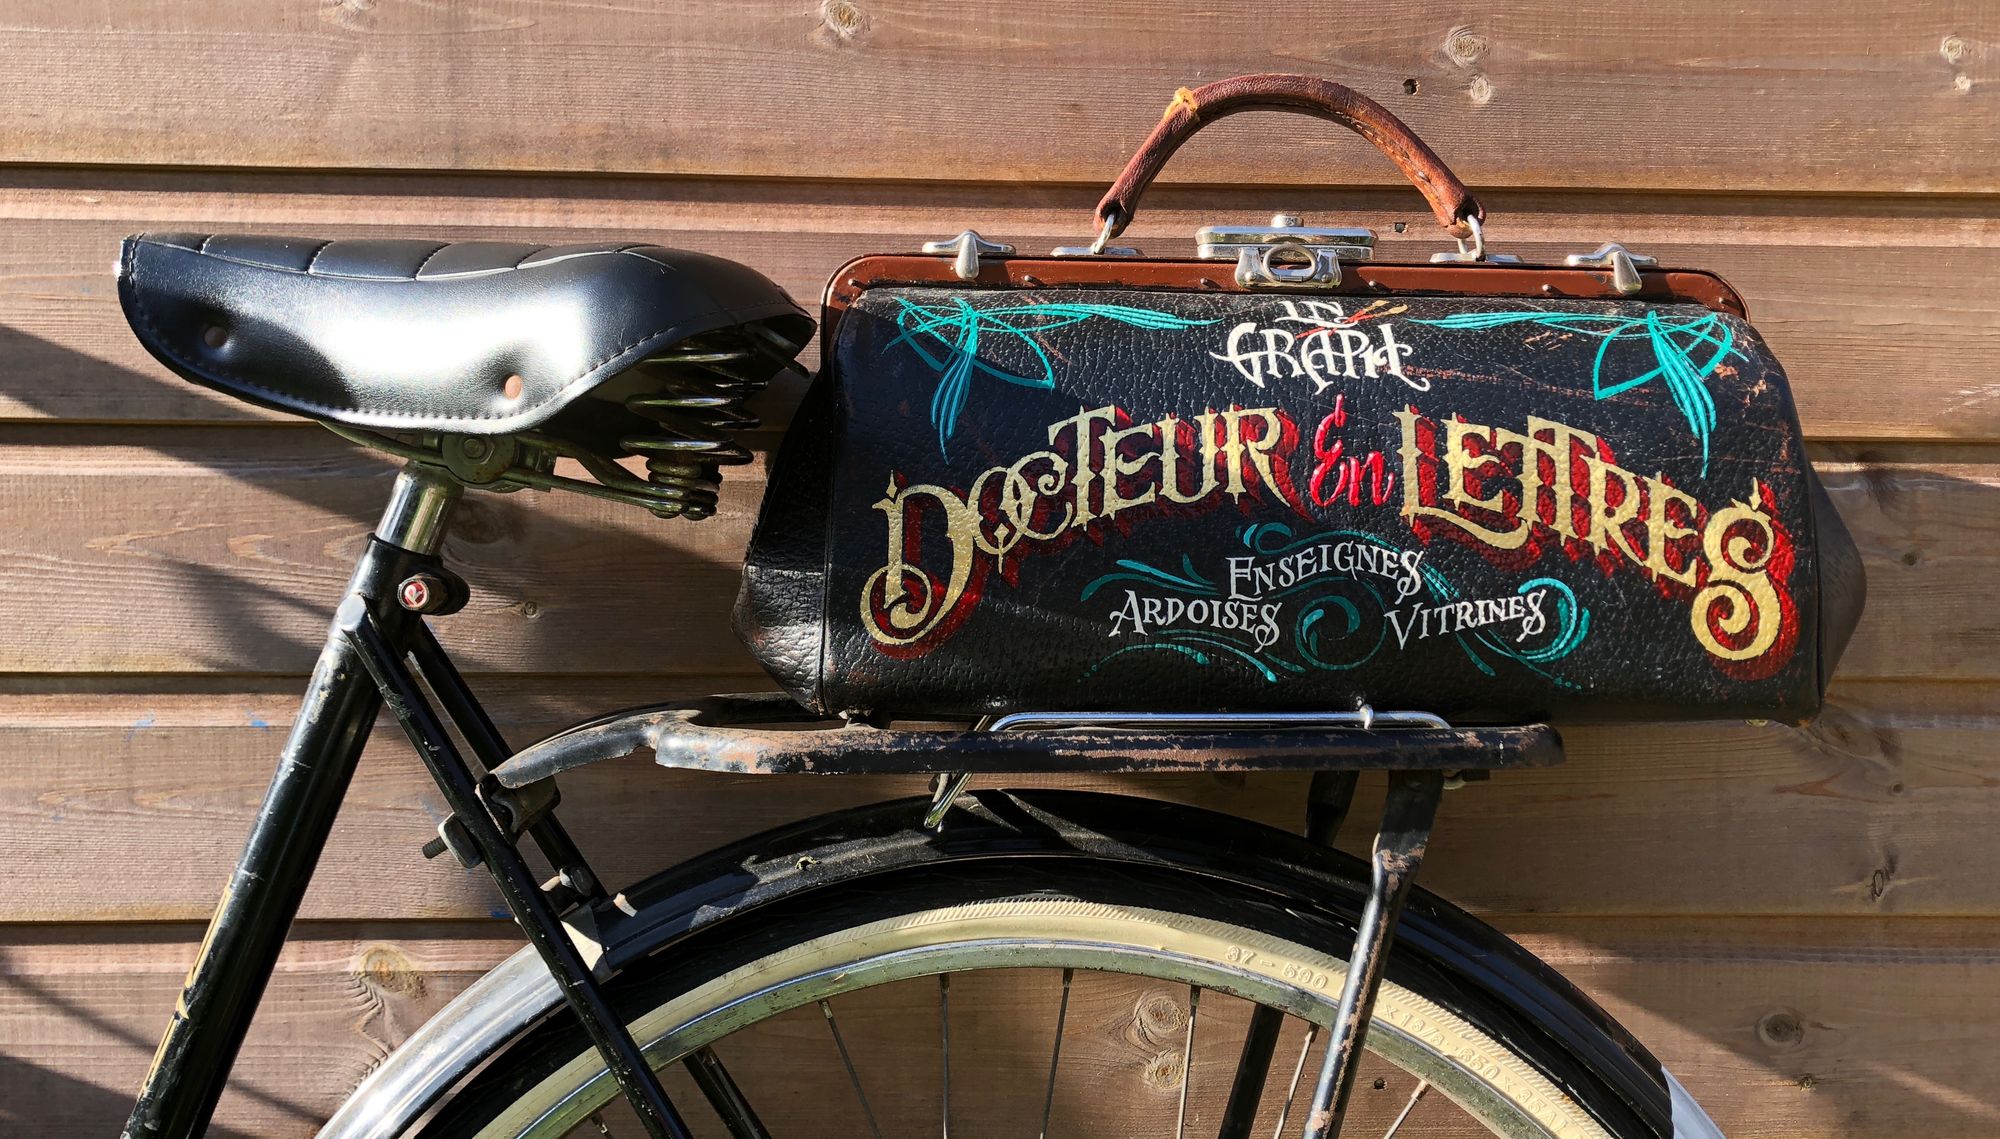 A doctor's kit bag painted to advertise a sign painter and mounted to the rack of a bike